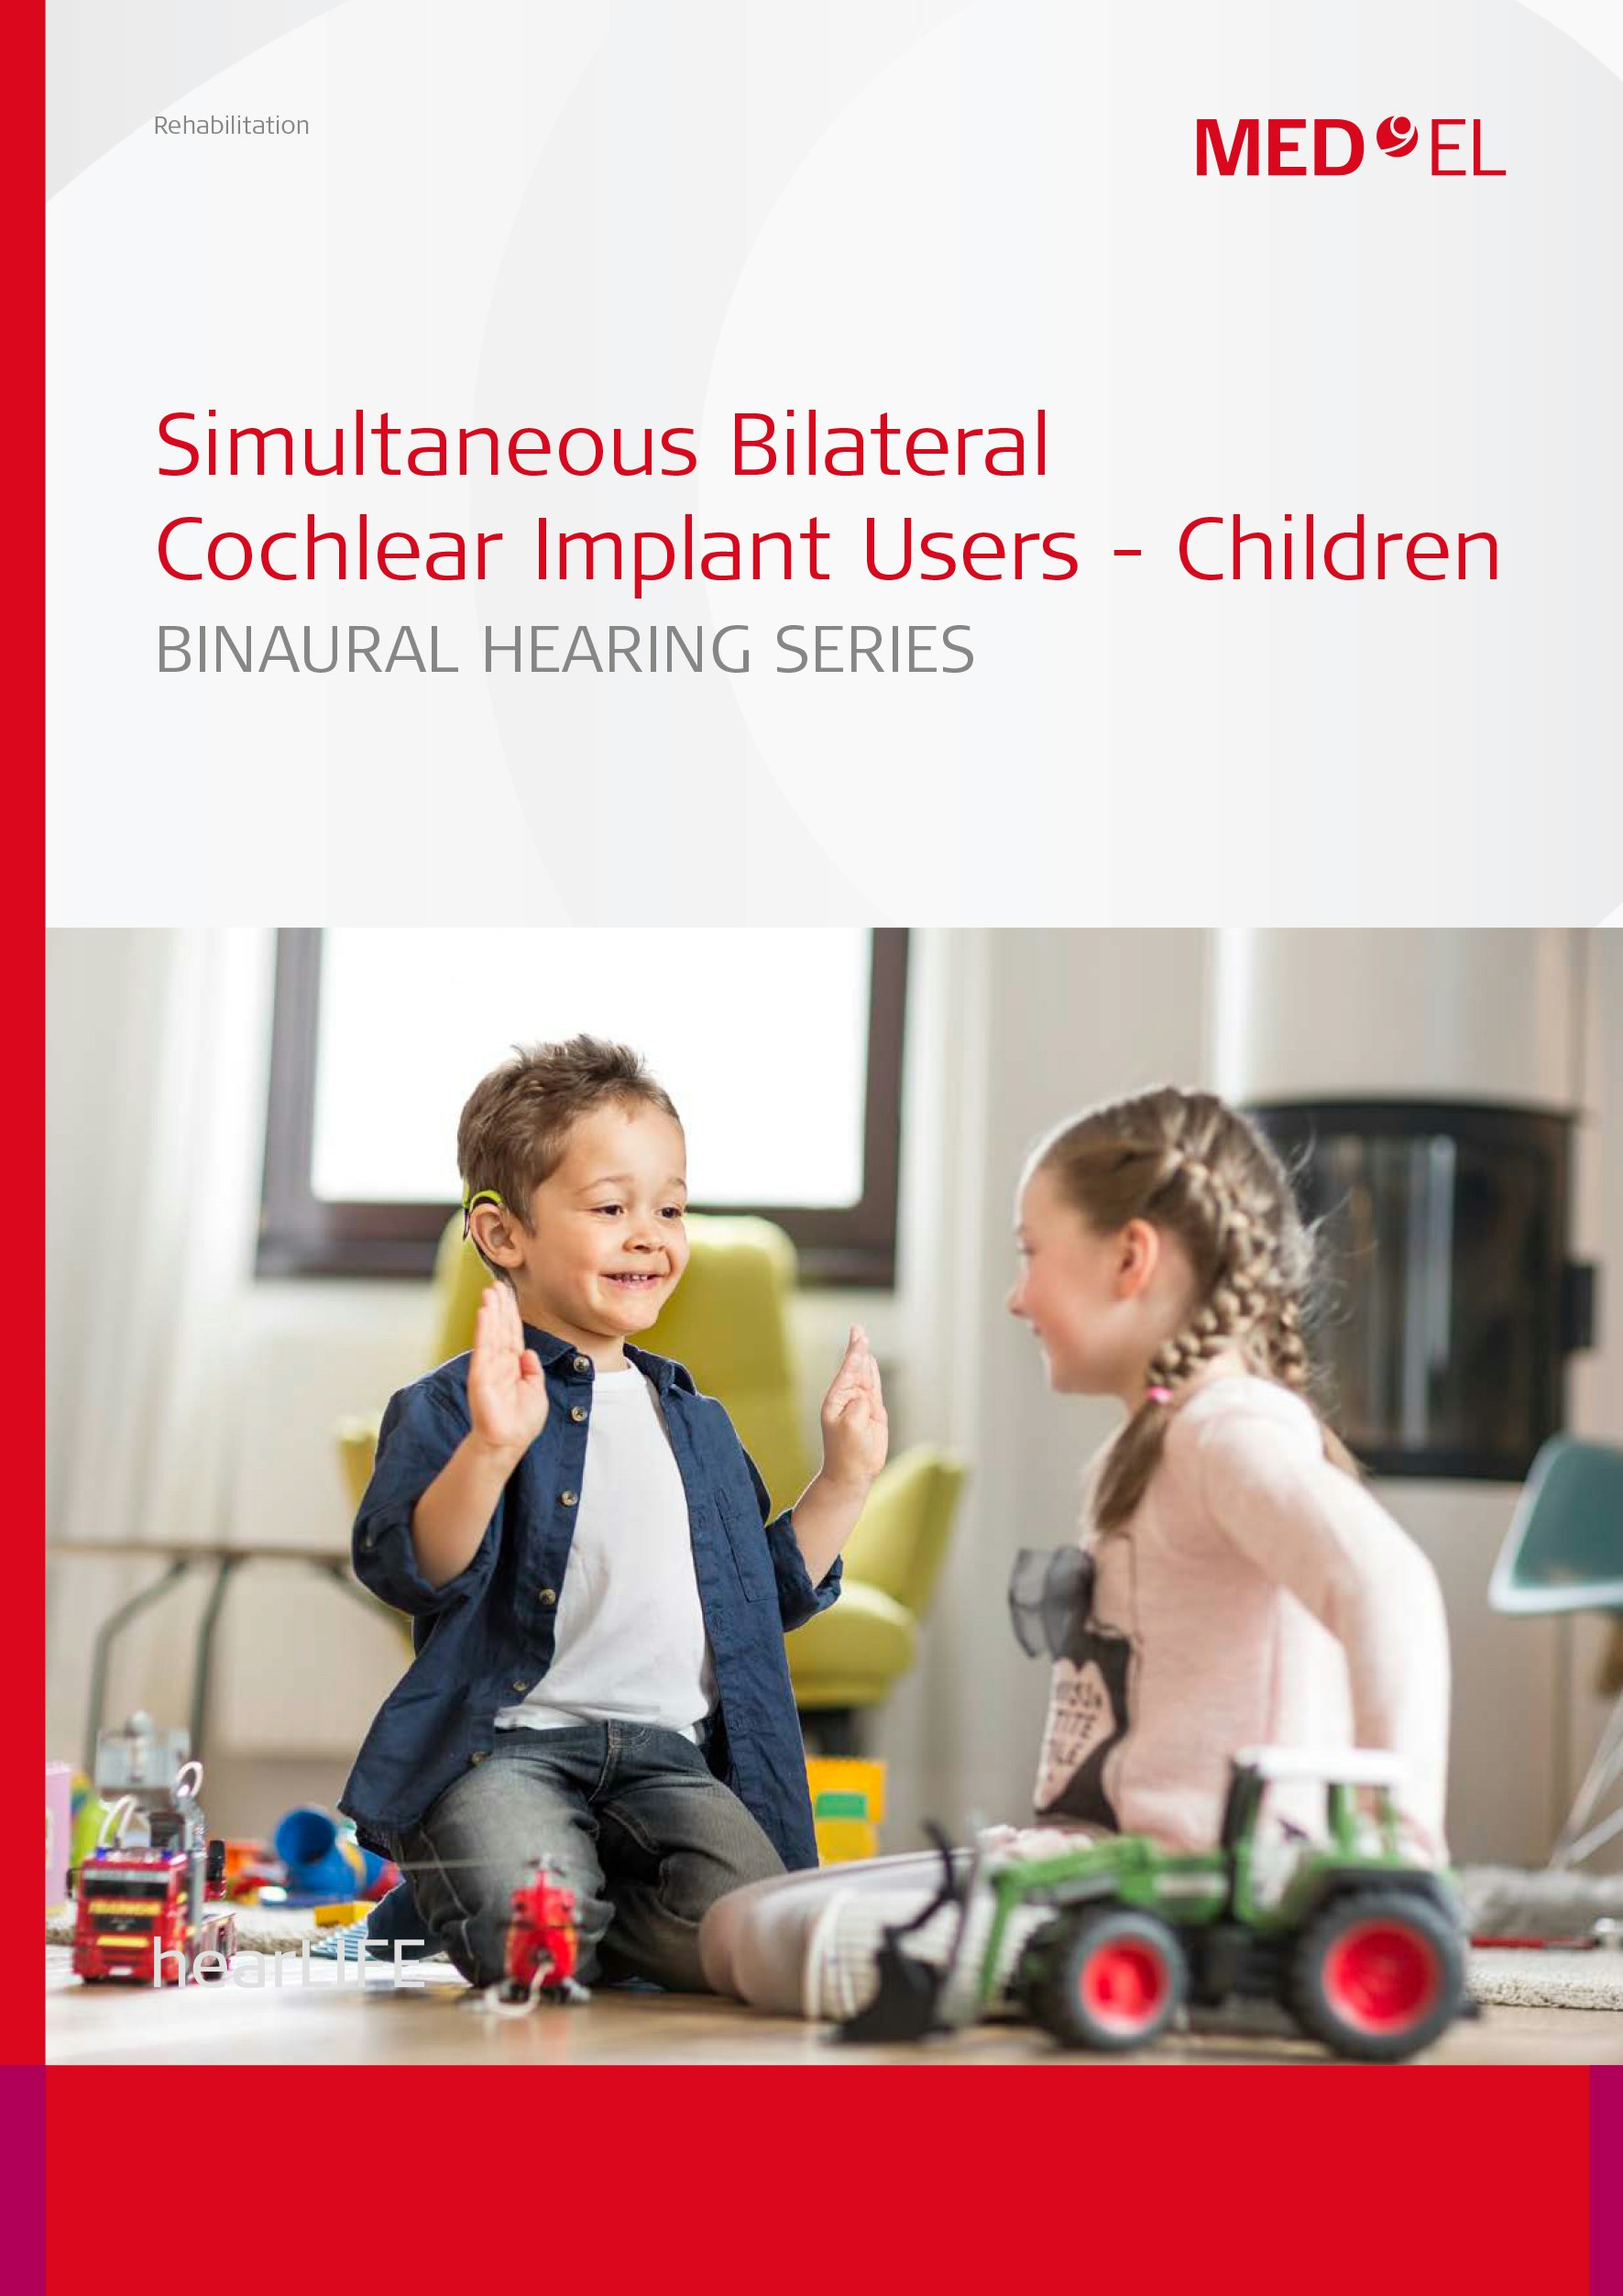 27888 1.0 Simultaneous Bilateral Cochlear Implant Users - Children